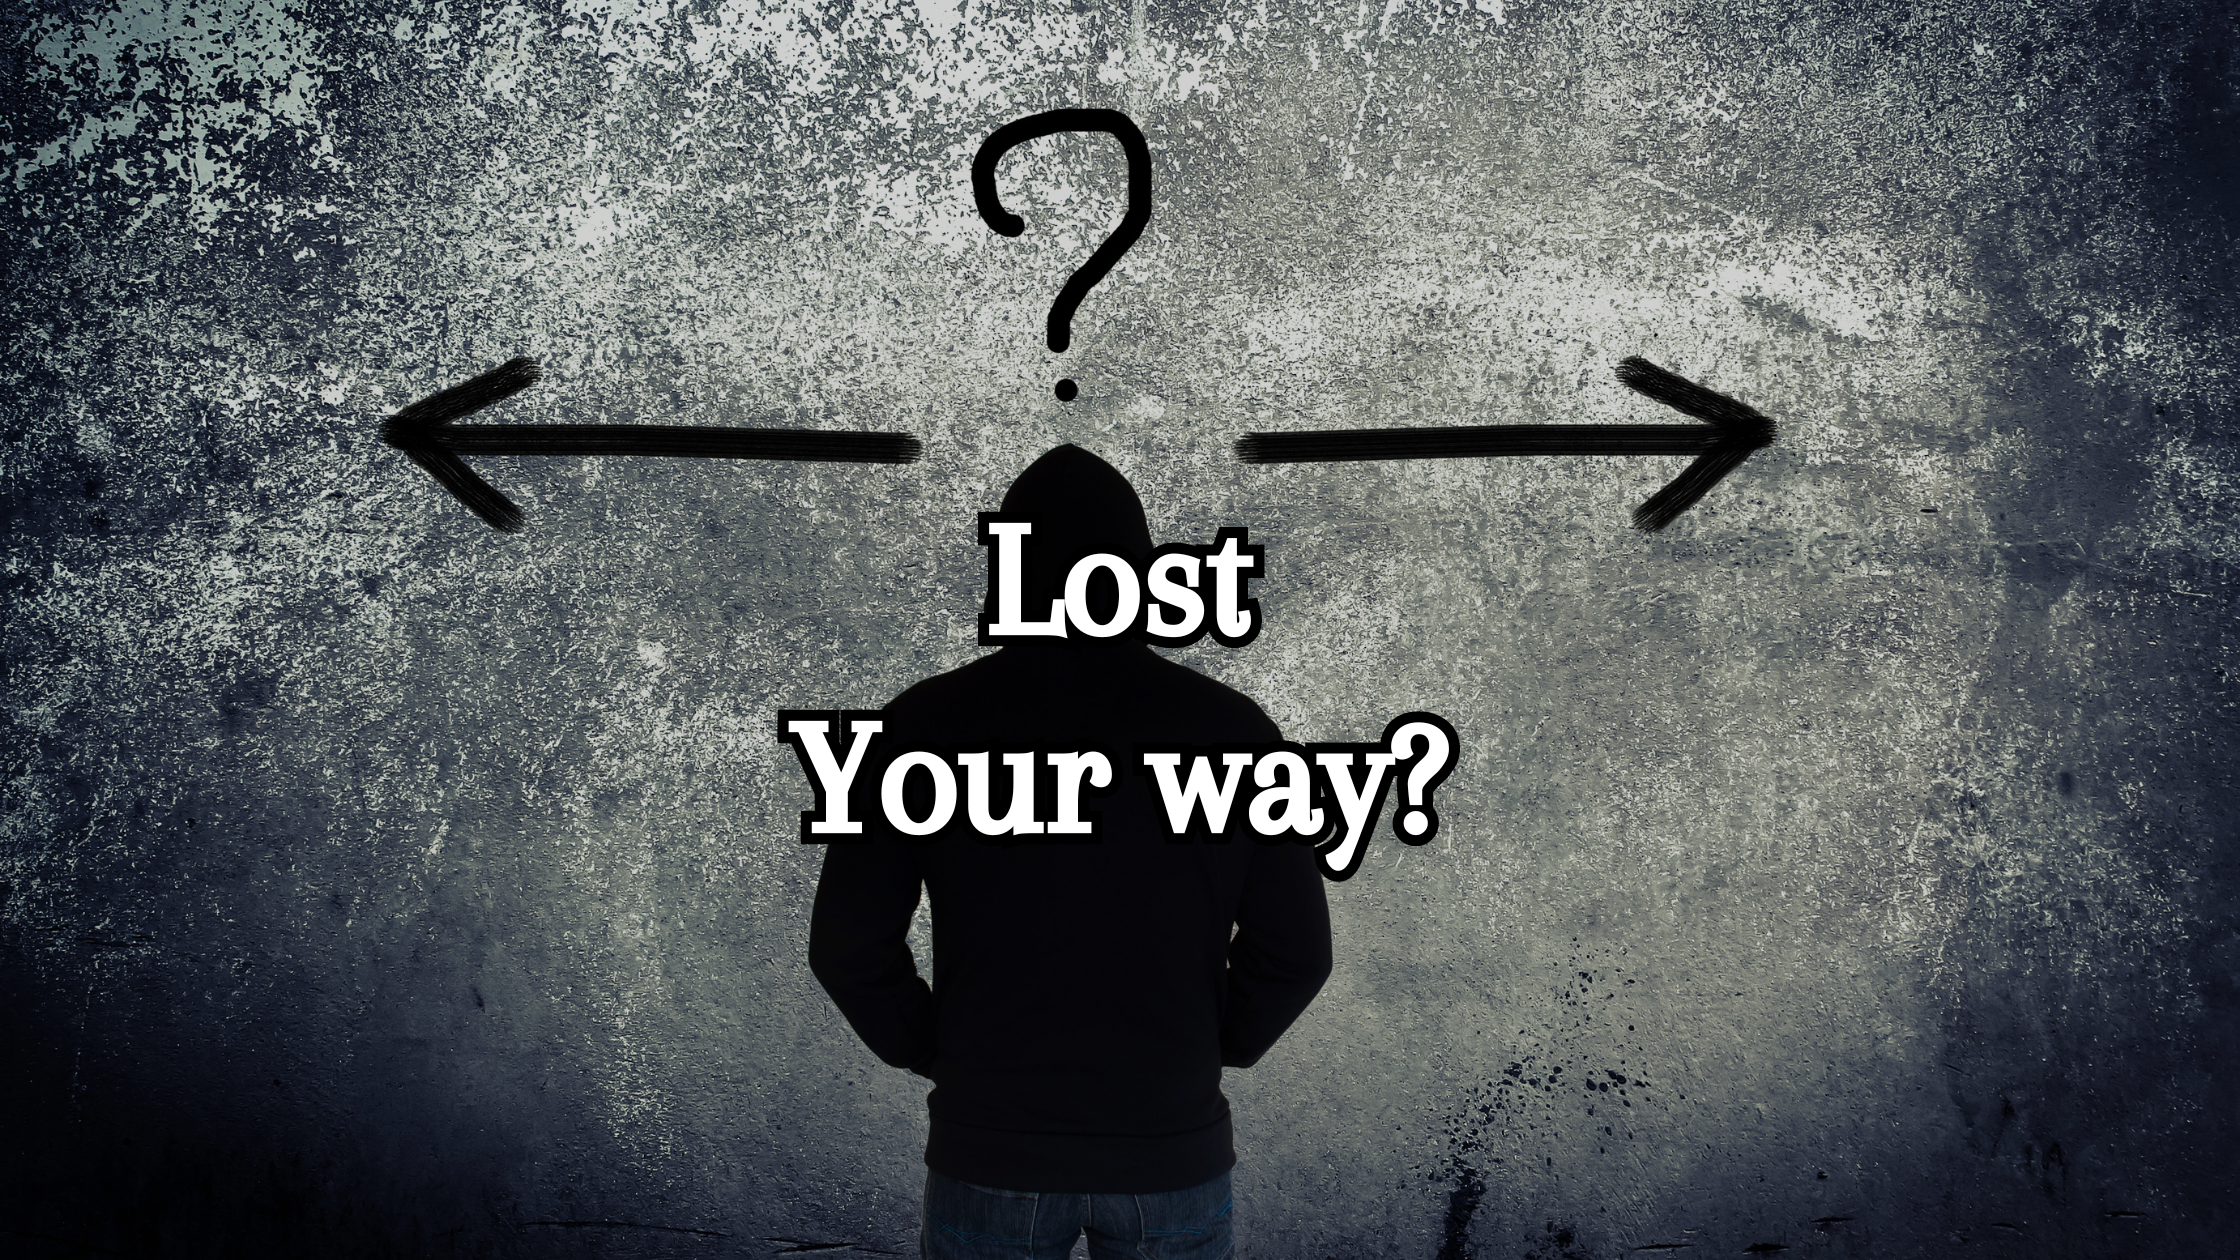 Lost your way?